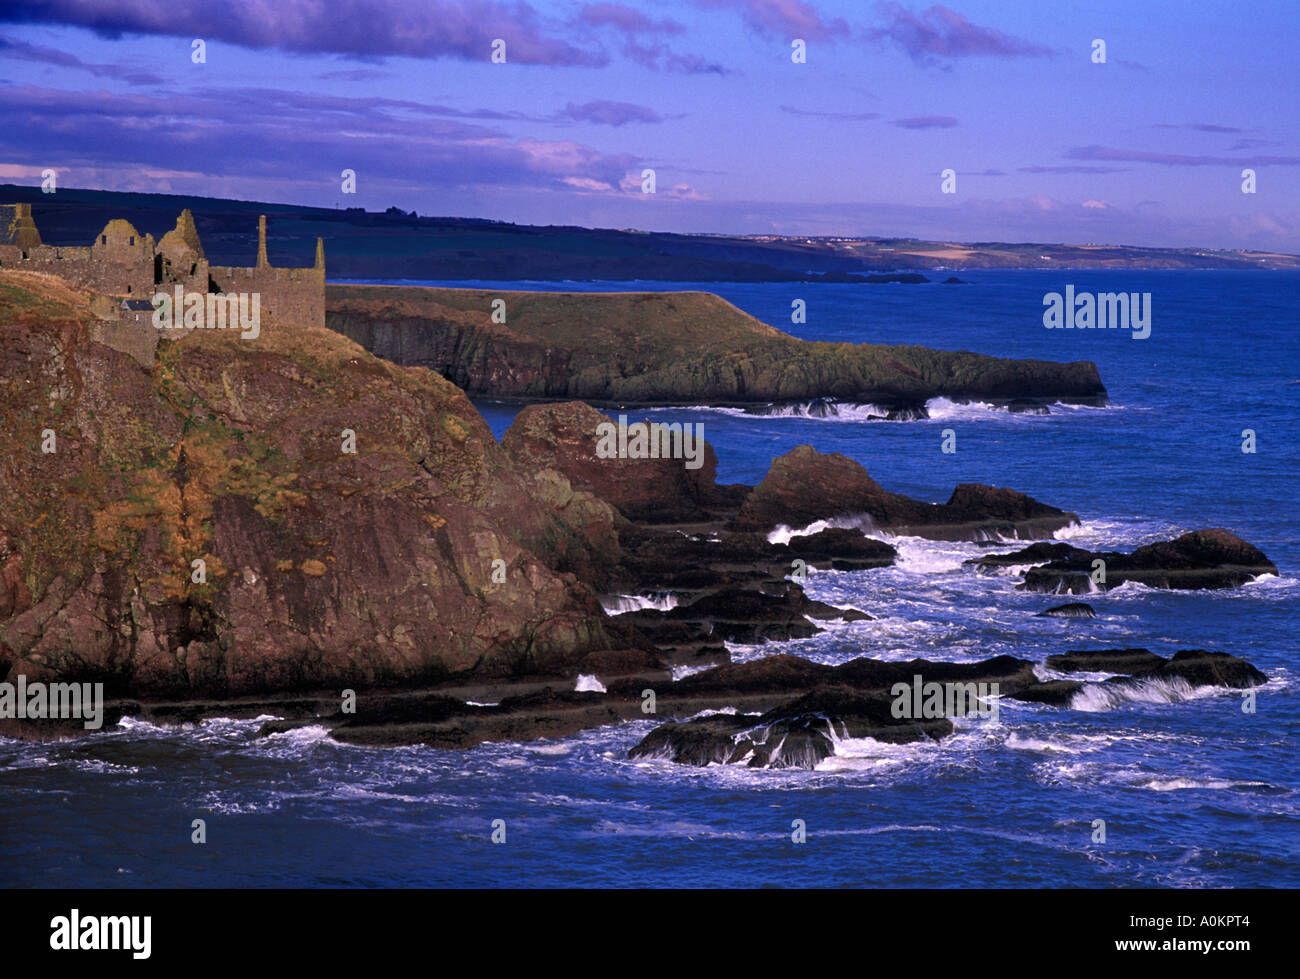 Dunnottar castle, Stonehaven, Scotland atop cliffs over looking the north east coastline into the distance. Stock Photo